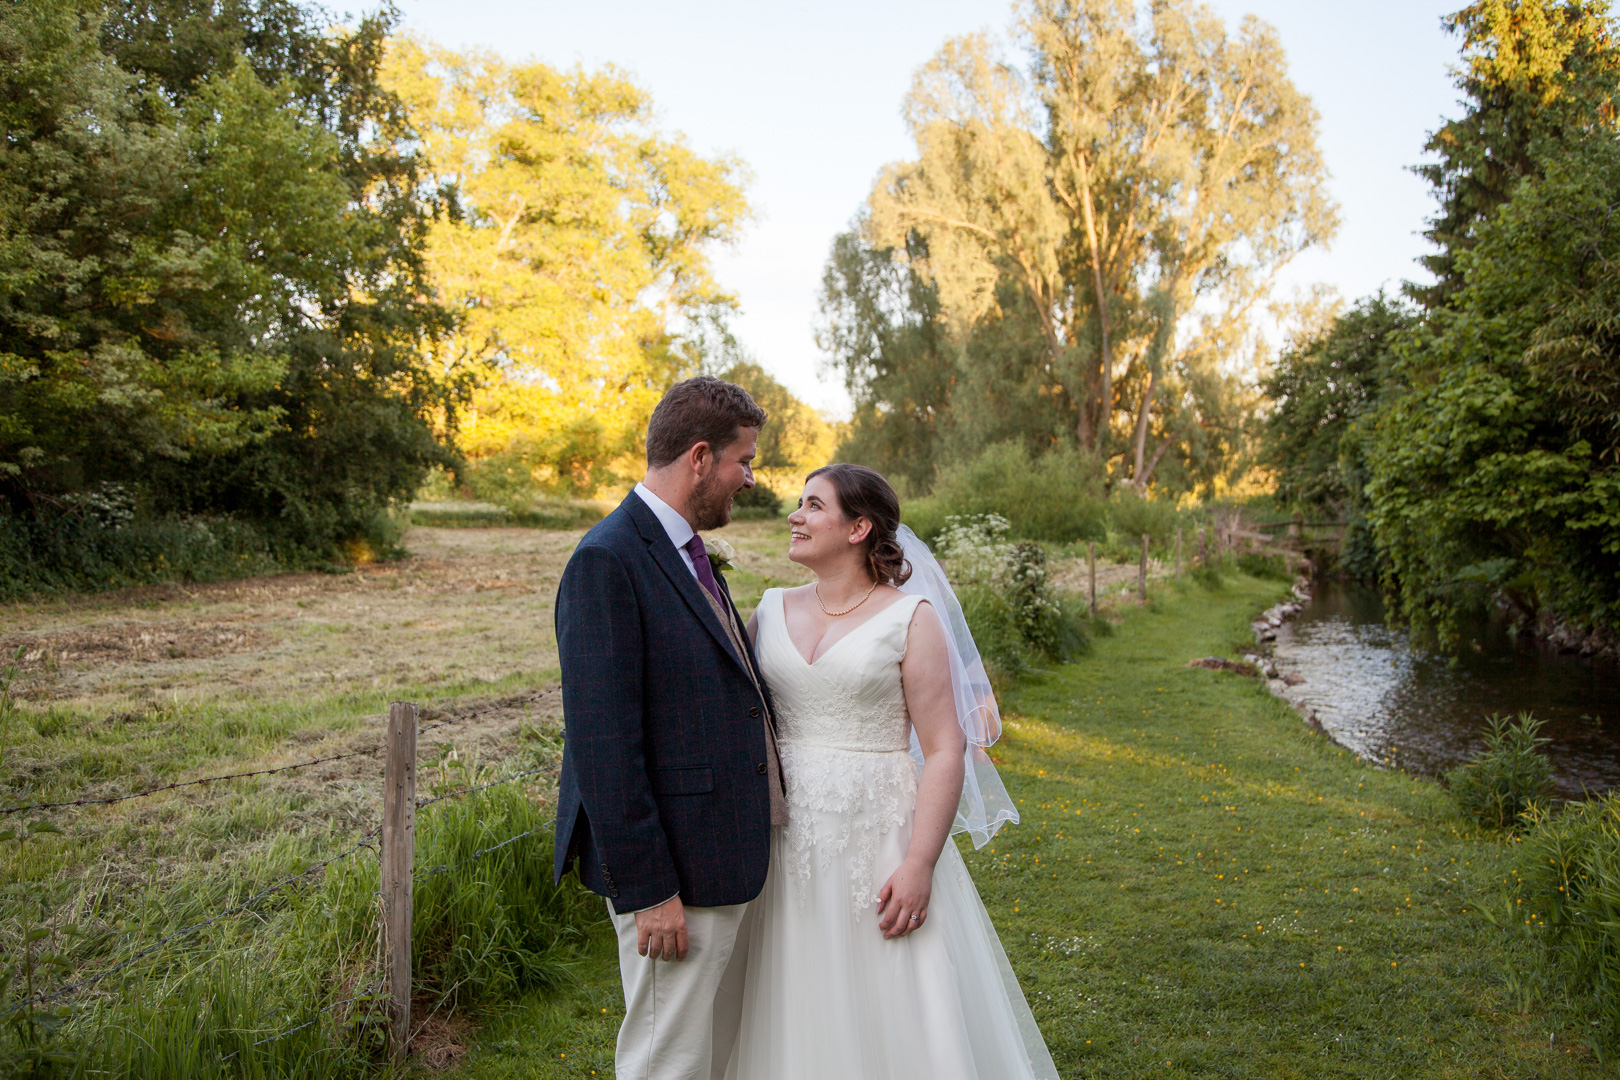 Bride and groom smile at each other in romantic portrait beside country stream